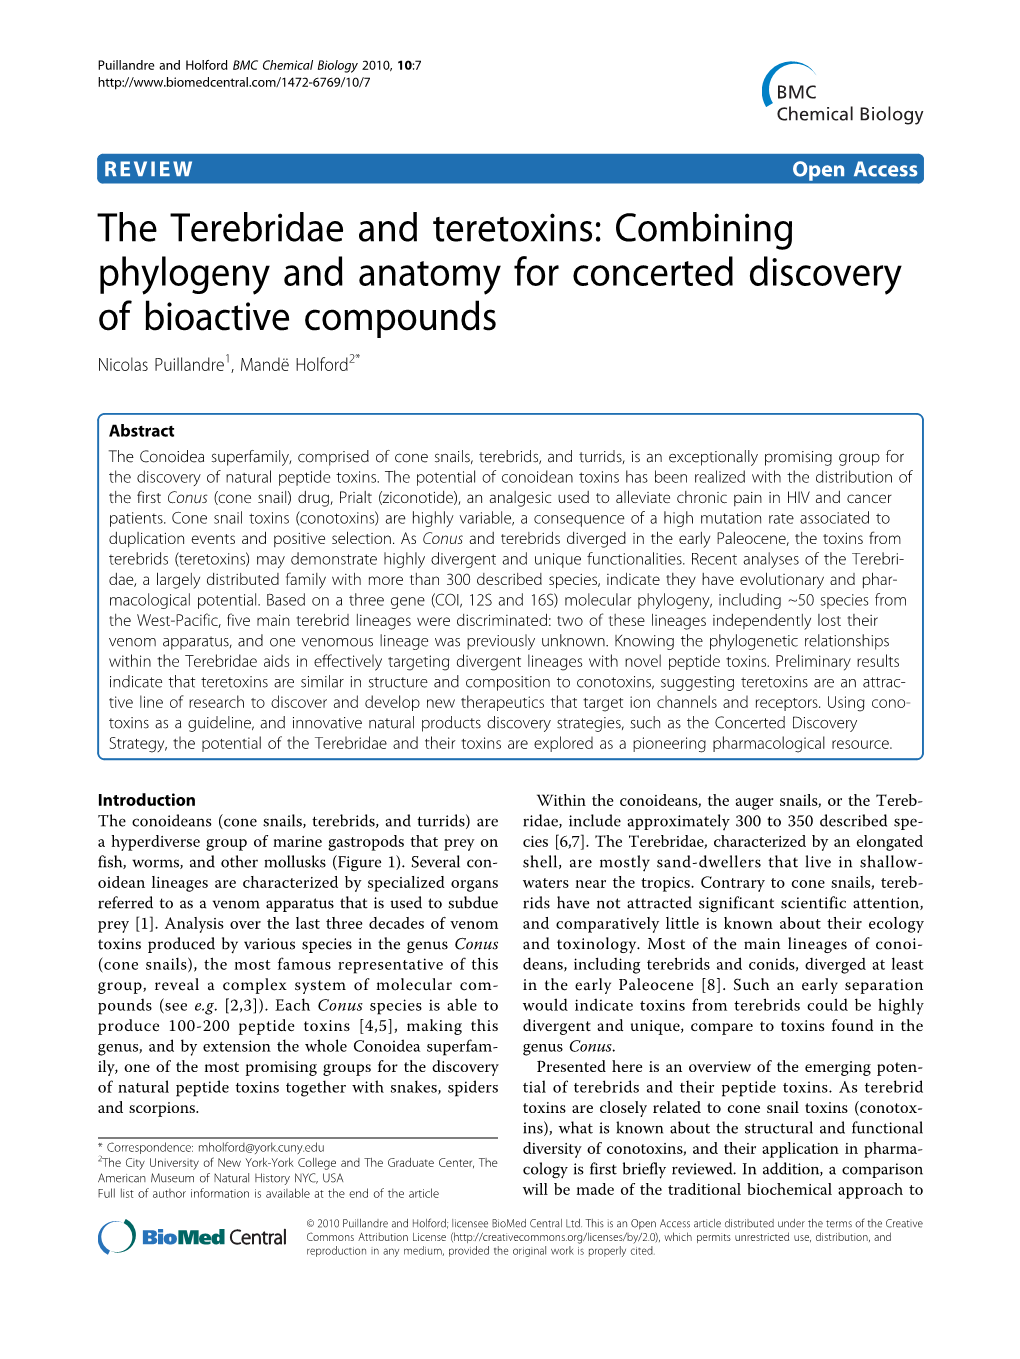 The Terebridae and Teretoxins: Combining Phylogeny and Anatomy for Concerted Discovery of Bioactive Compounds Nicolas Puillandre1, Mandë Holford2*